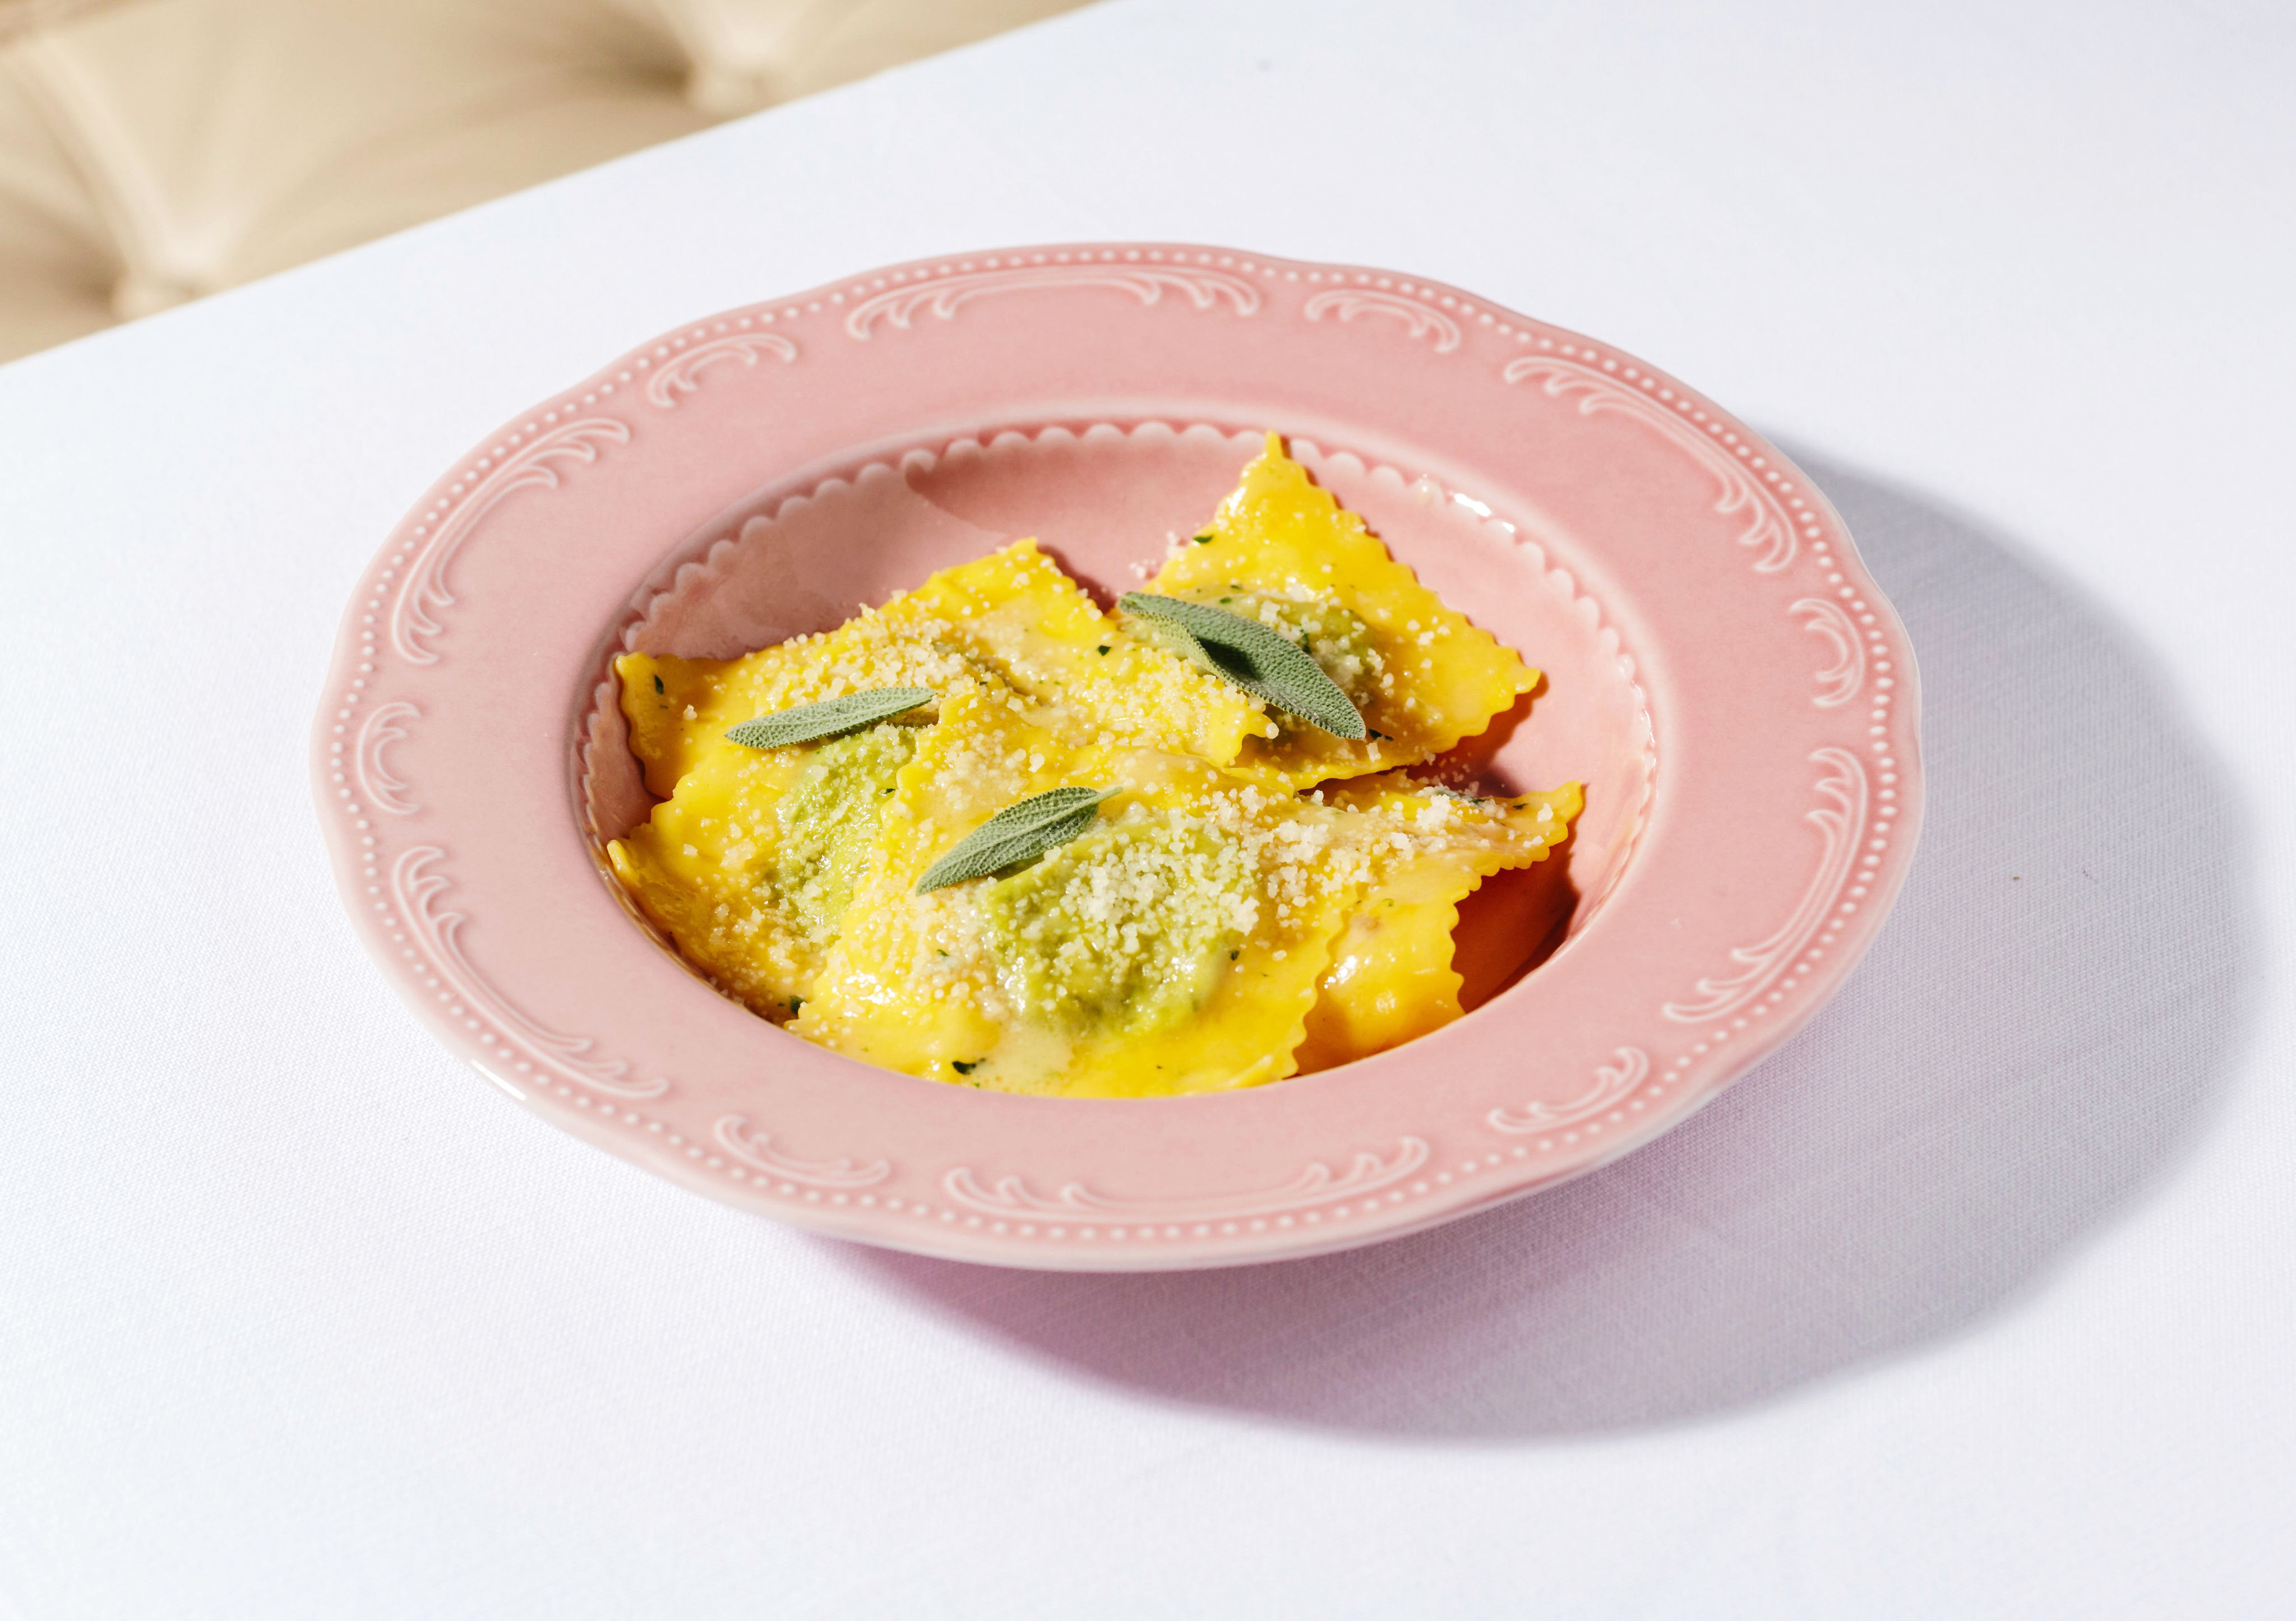 Ramato’s ricotta and spinach ravioli is just one of the numerous new dishes waiting for you in Hong Kong this June. Photo: Handout